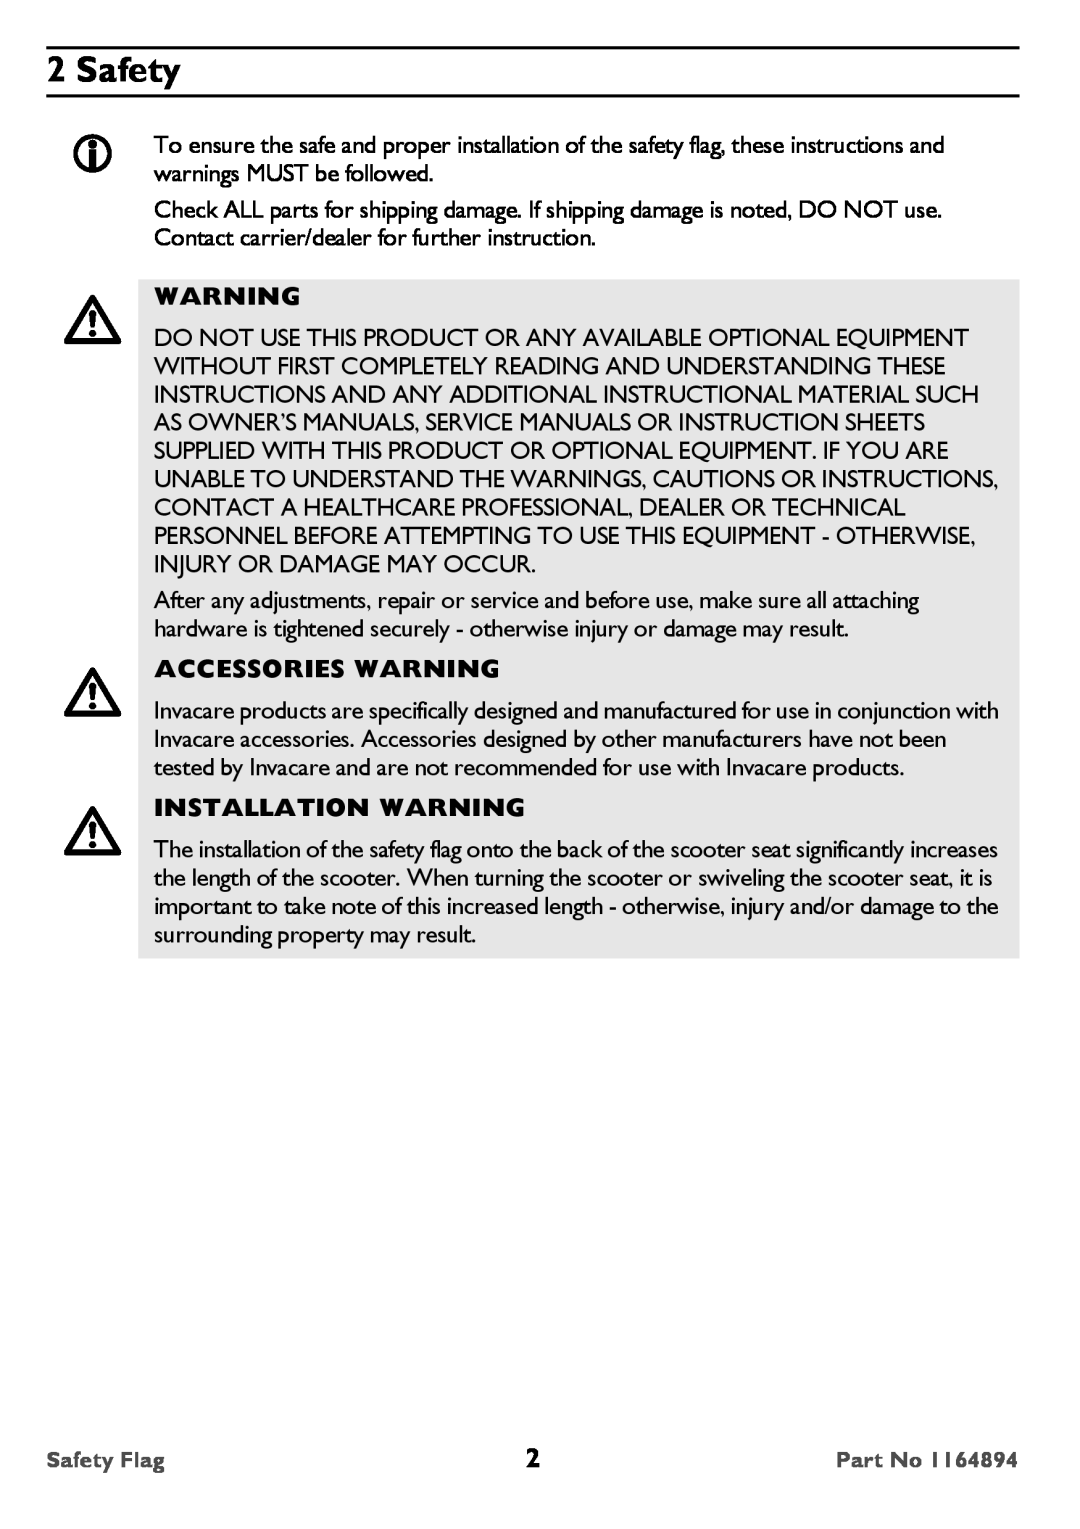 Invacare ACC140 user manual Safety, Accessories Warning, Installation Warning 